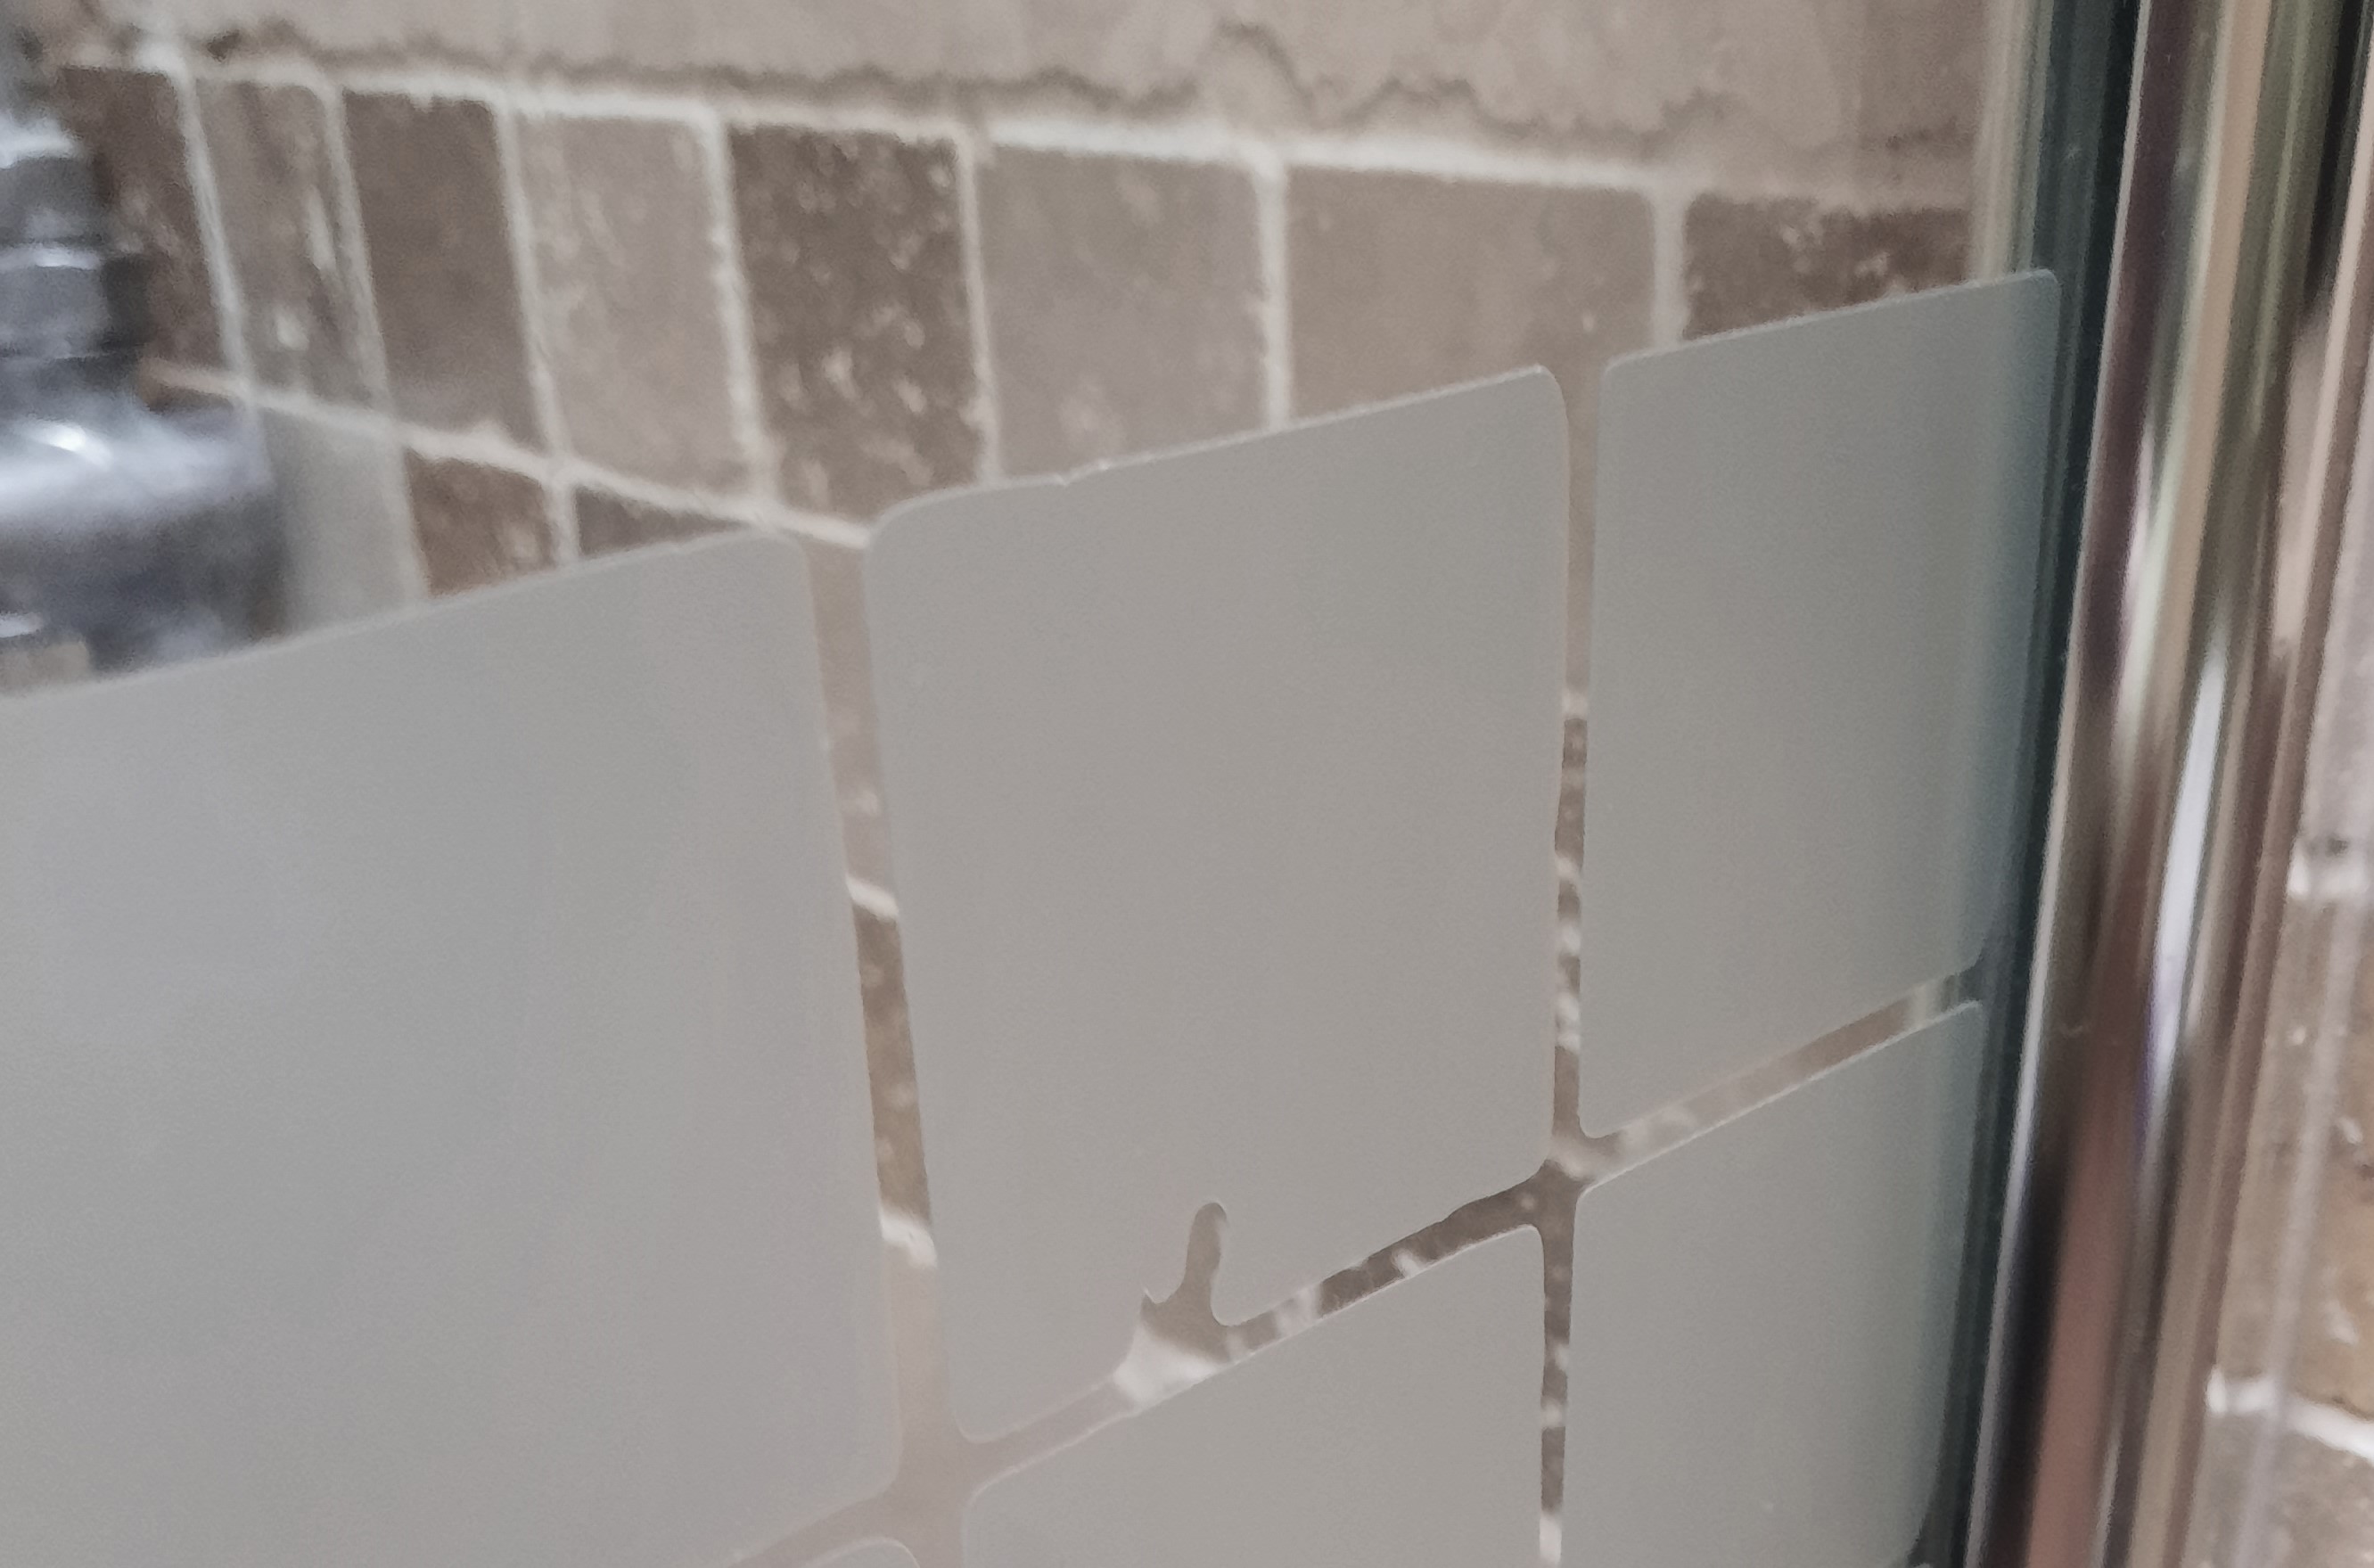 Frosting designed to match the bathroom tiles and provide visibility of the glass divide.